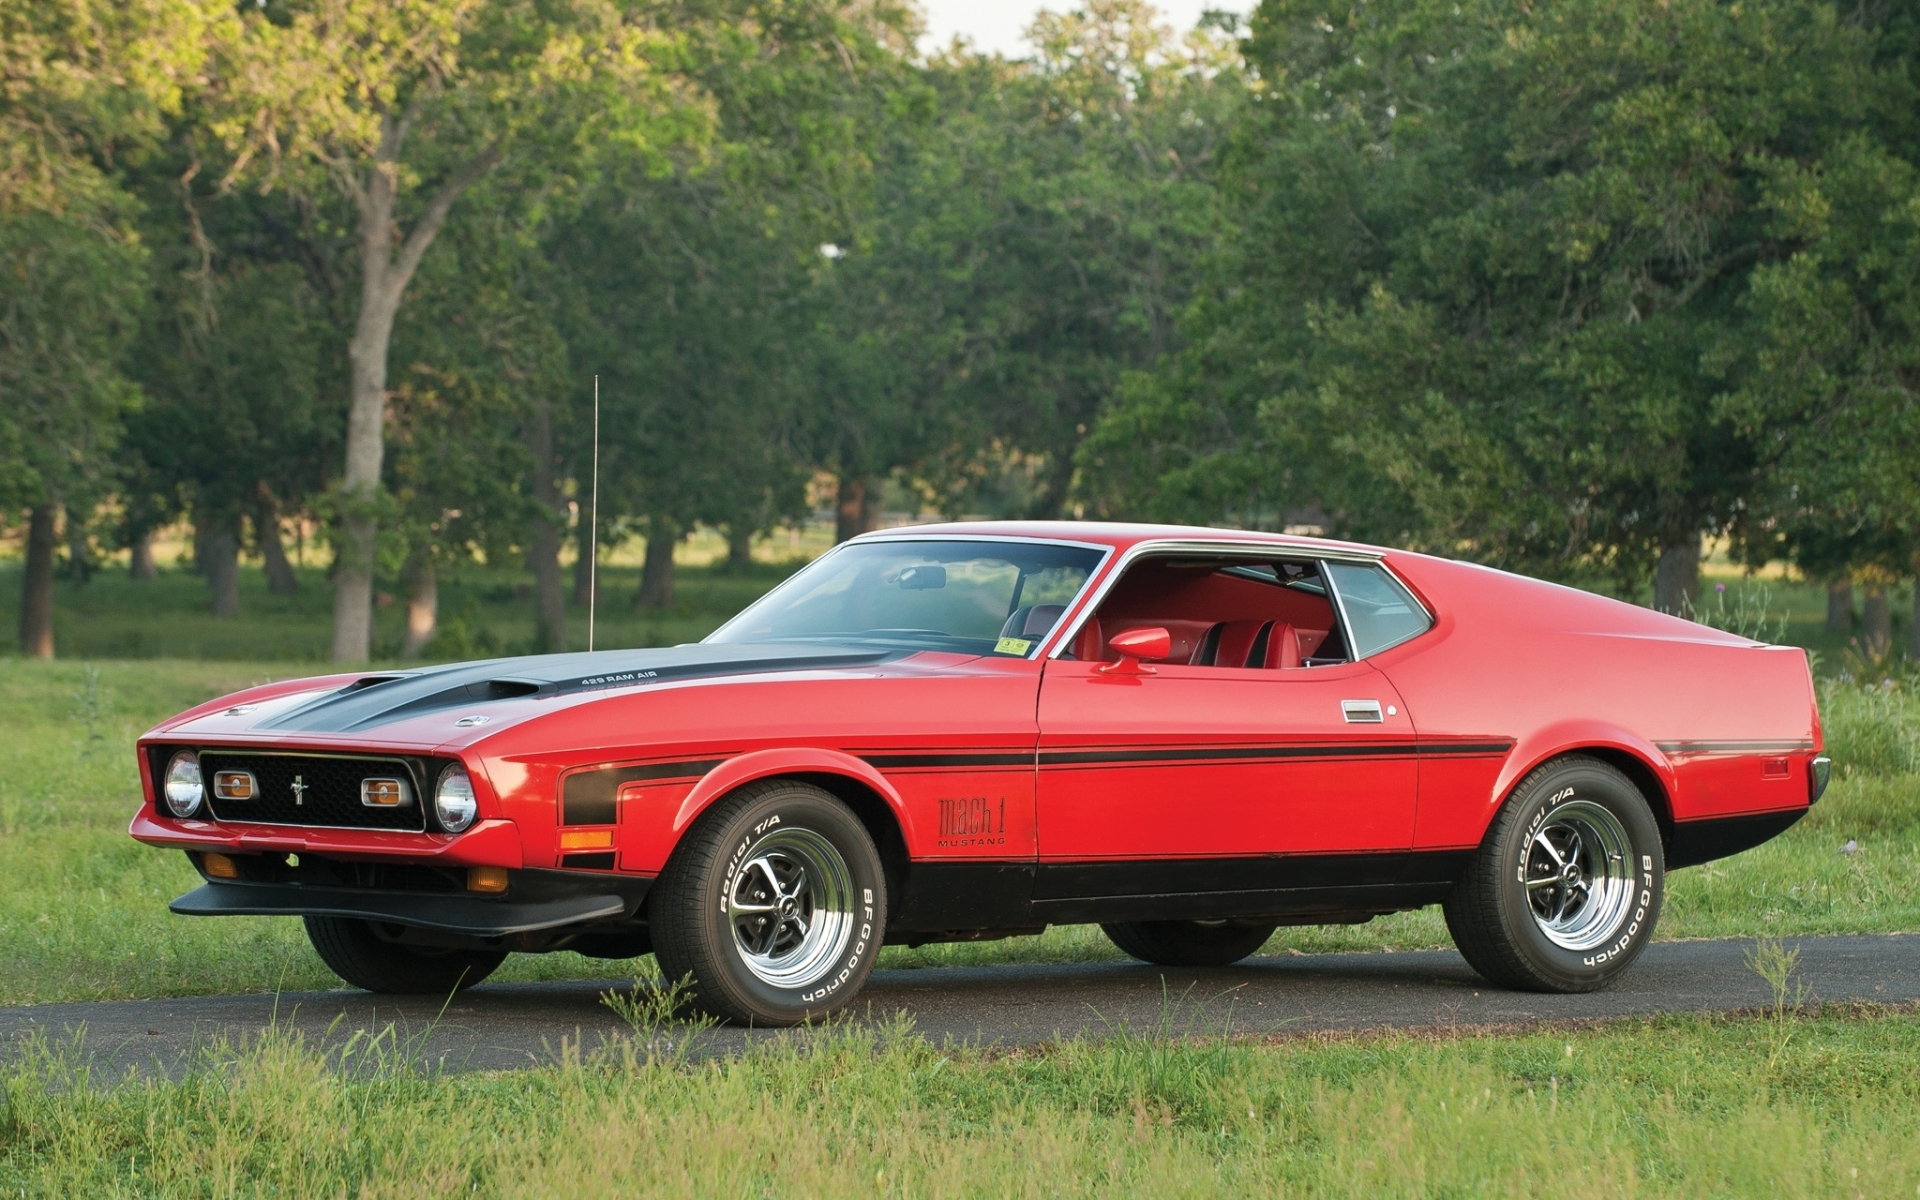 Ford Mustang Mach 1 Wallpapers